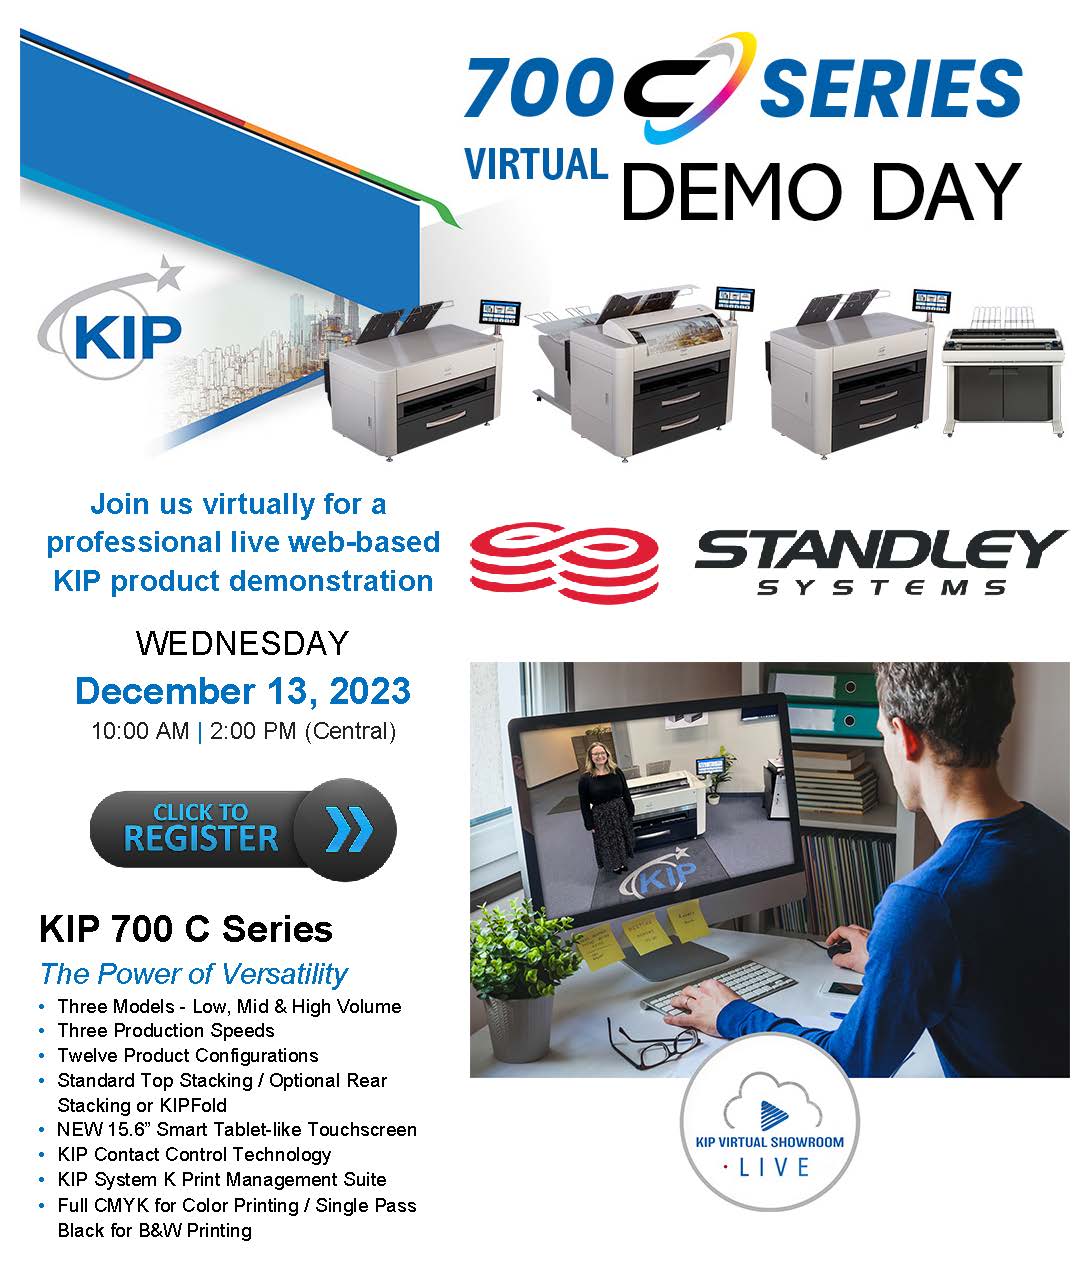 Standley Systems - KIP 700 C Series Virtual Demo Days Email Invite